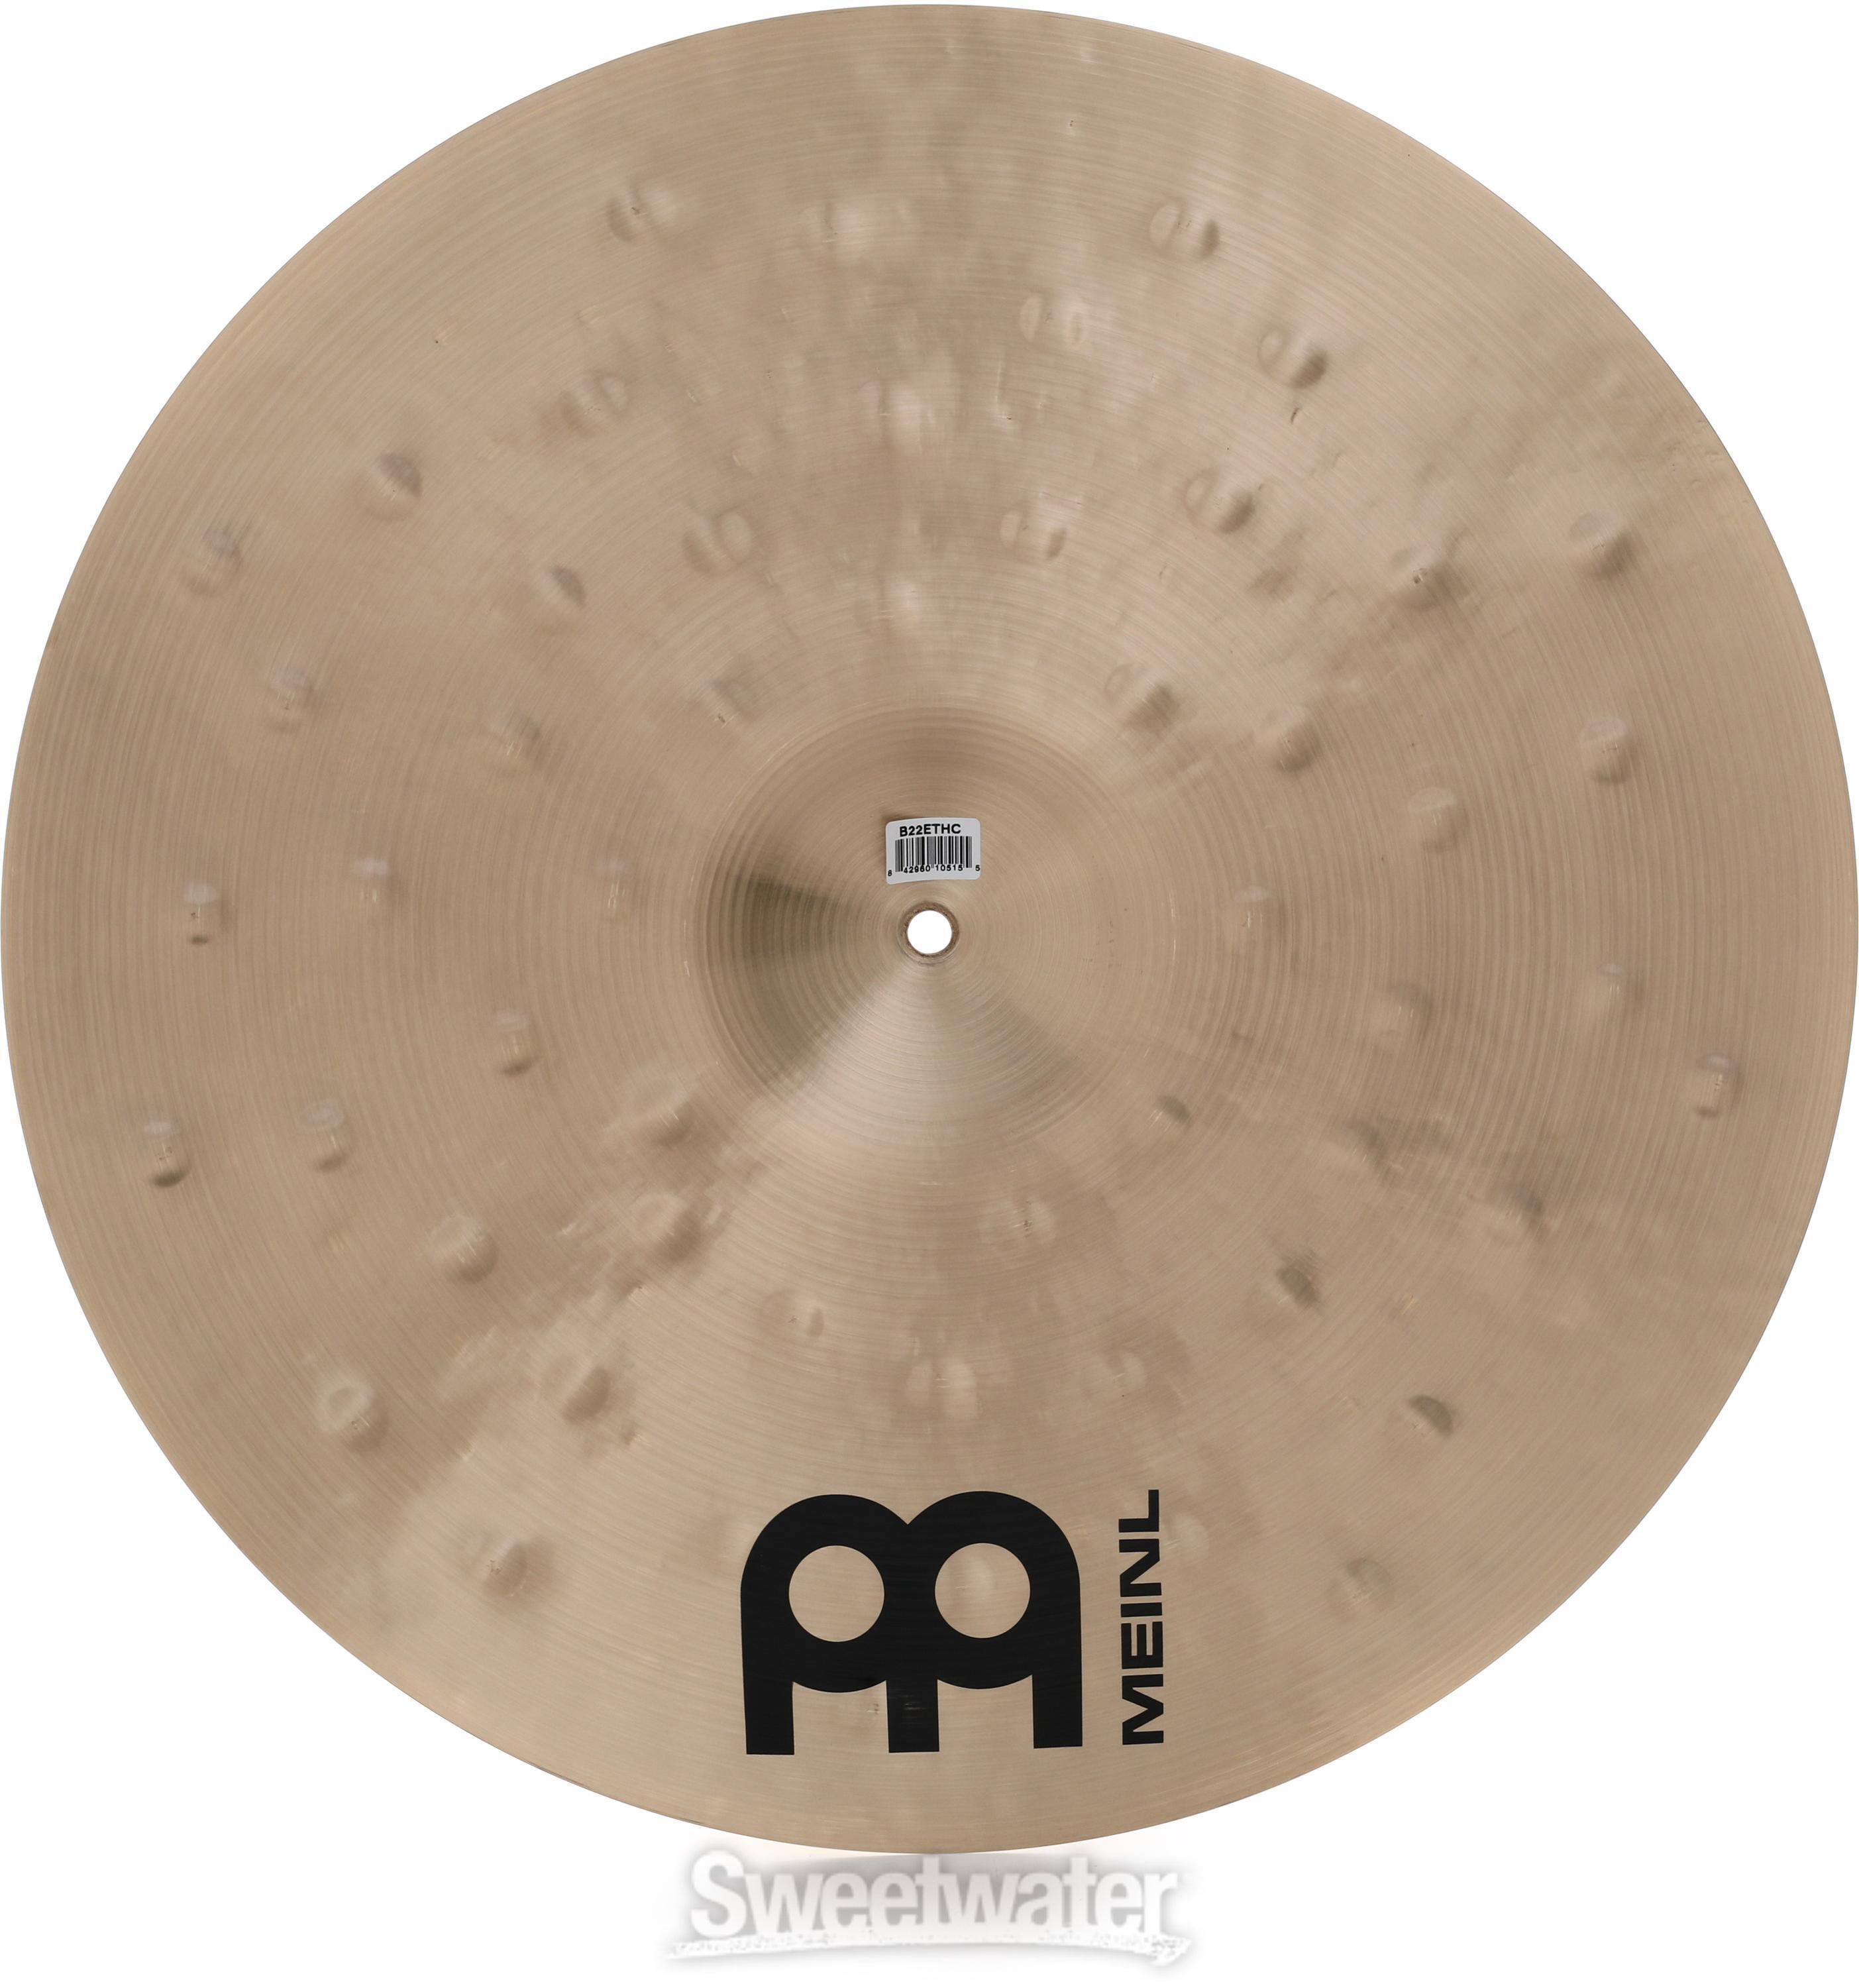 Meinl Cymbals 22 inch Byzance Traditional Extra-thin Hammered Crash Cymbal